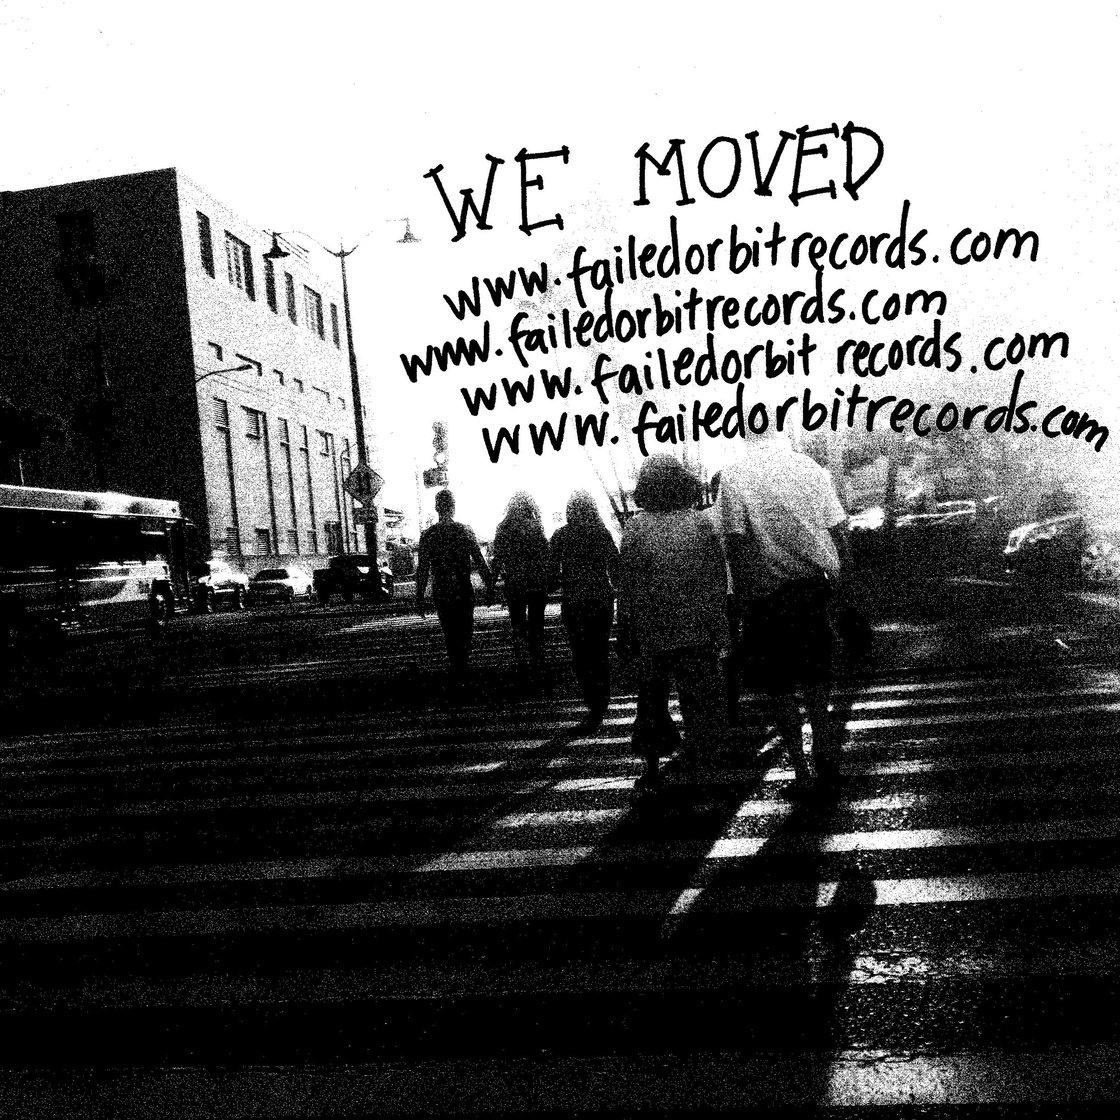 Image of WE MOVED TO WWW.FAILEDORBITRECORDS.COM